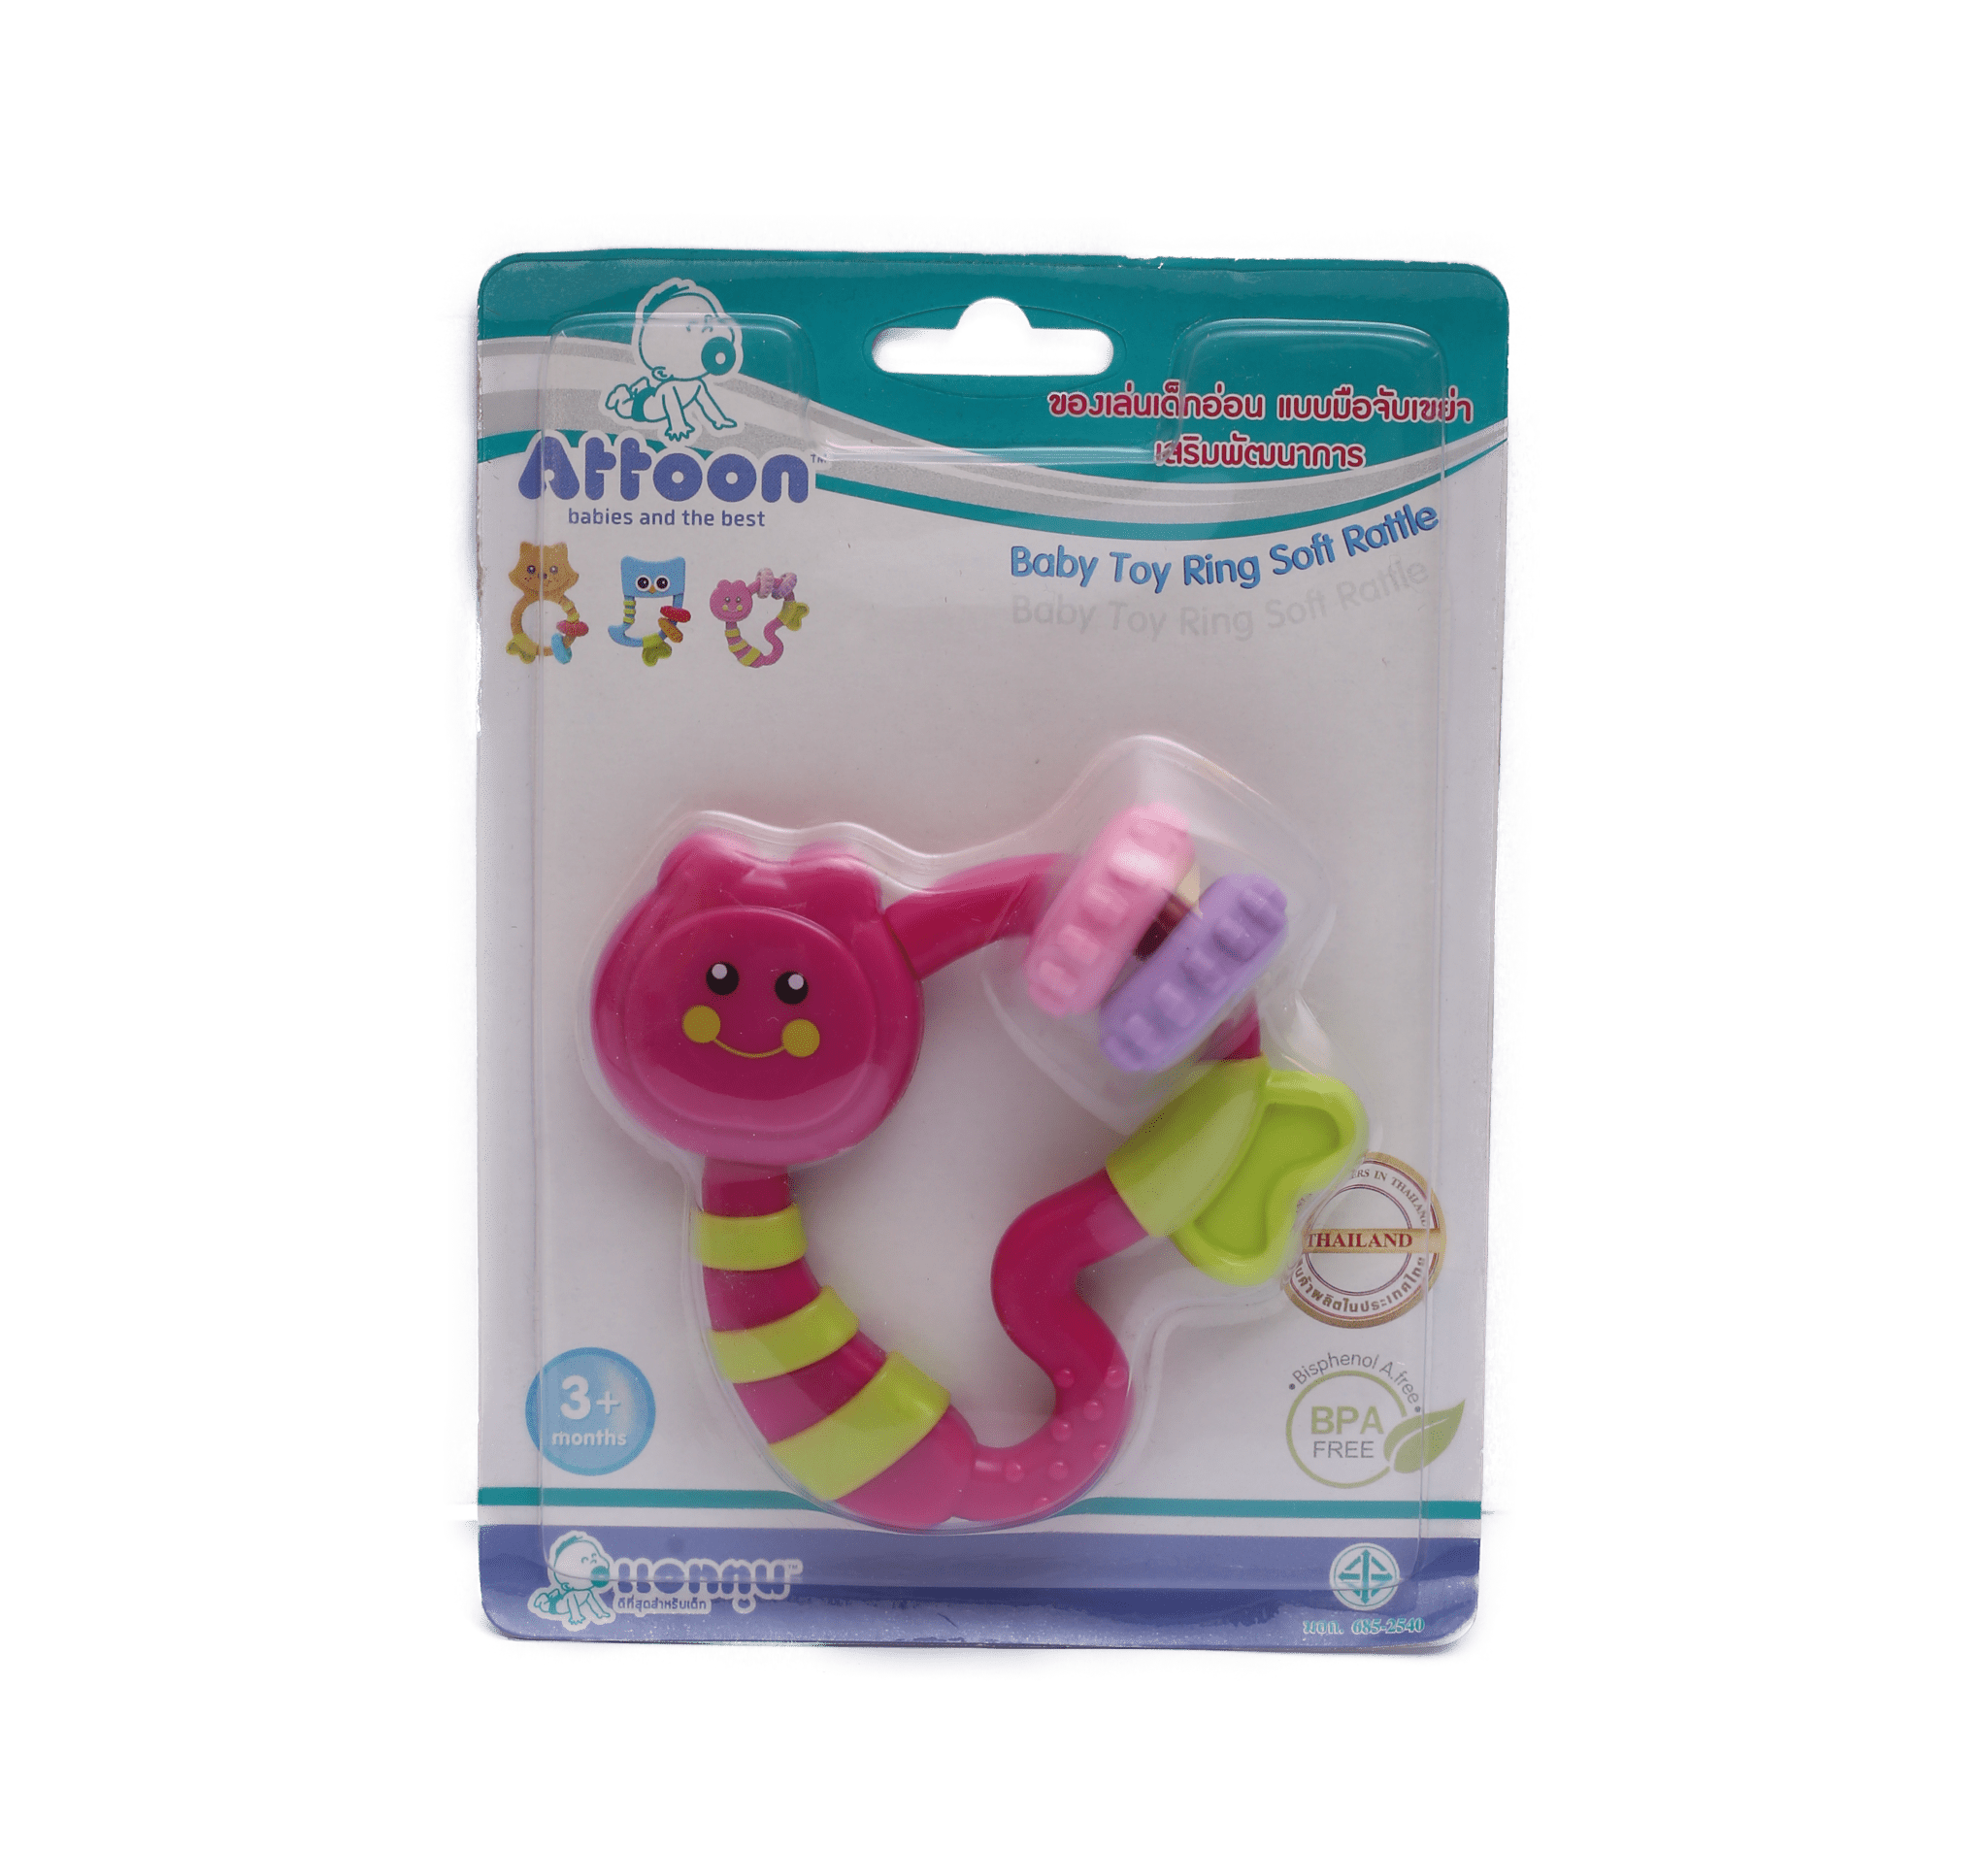 Attoon Soft Rattle Teether